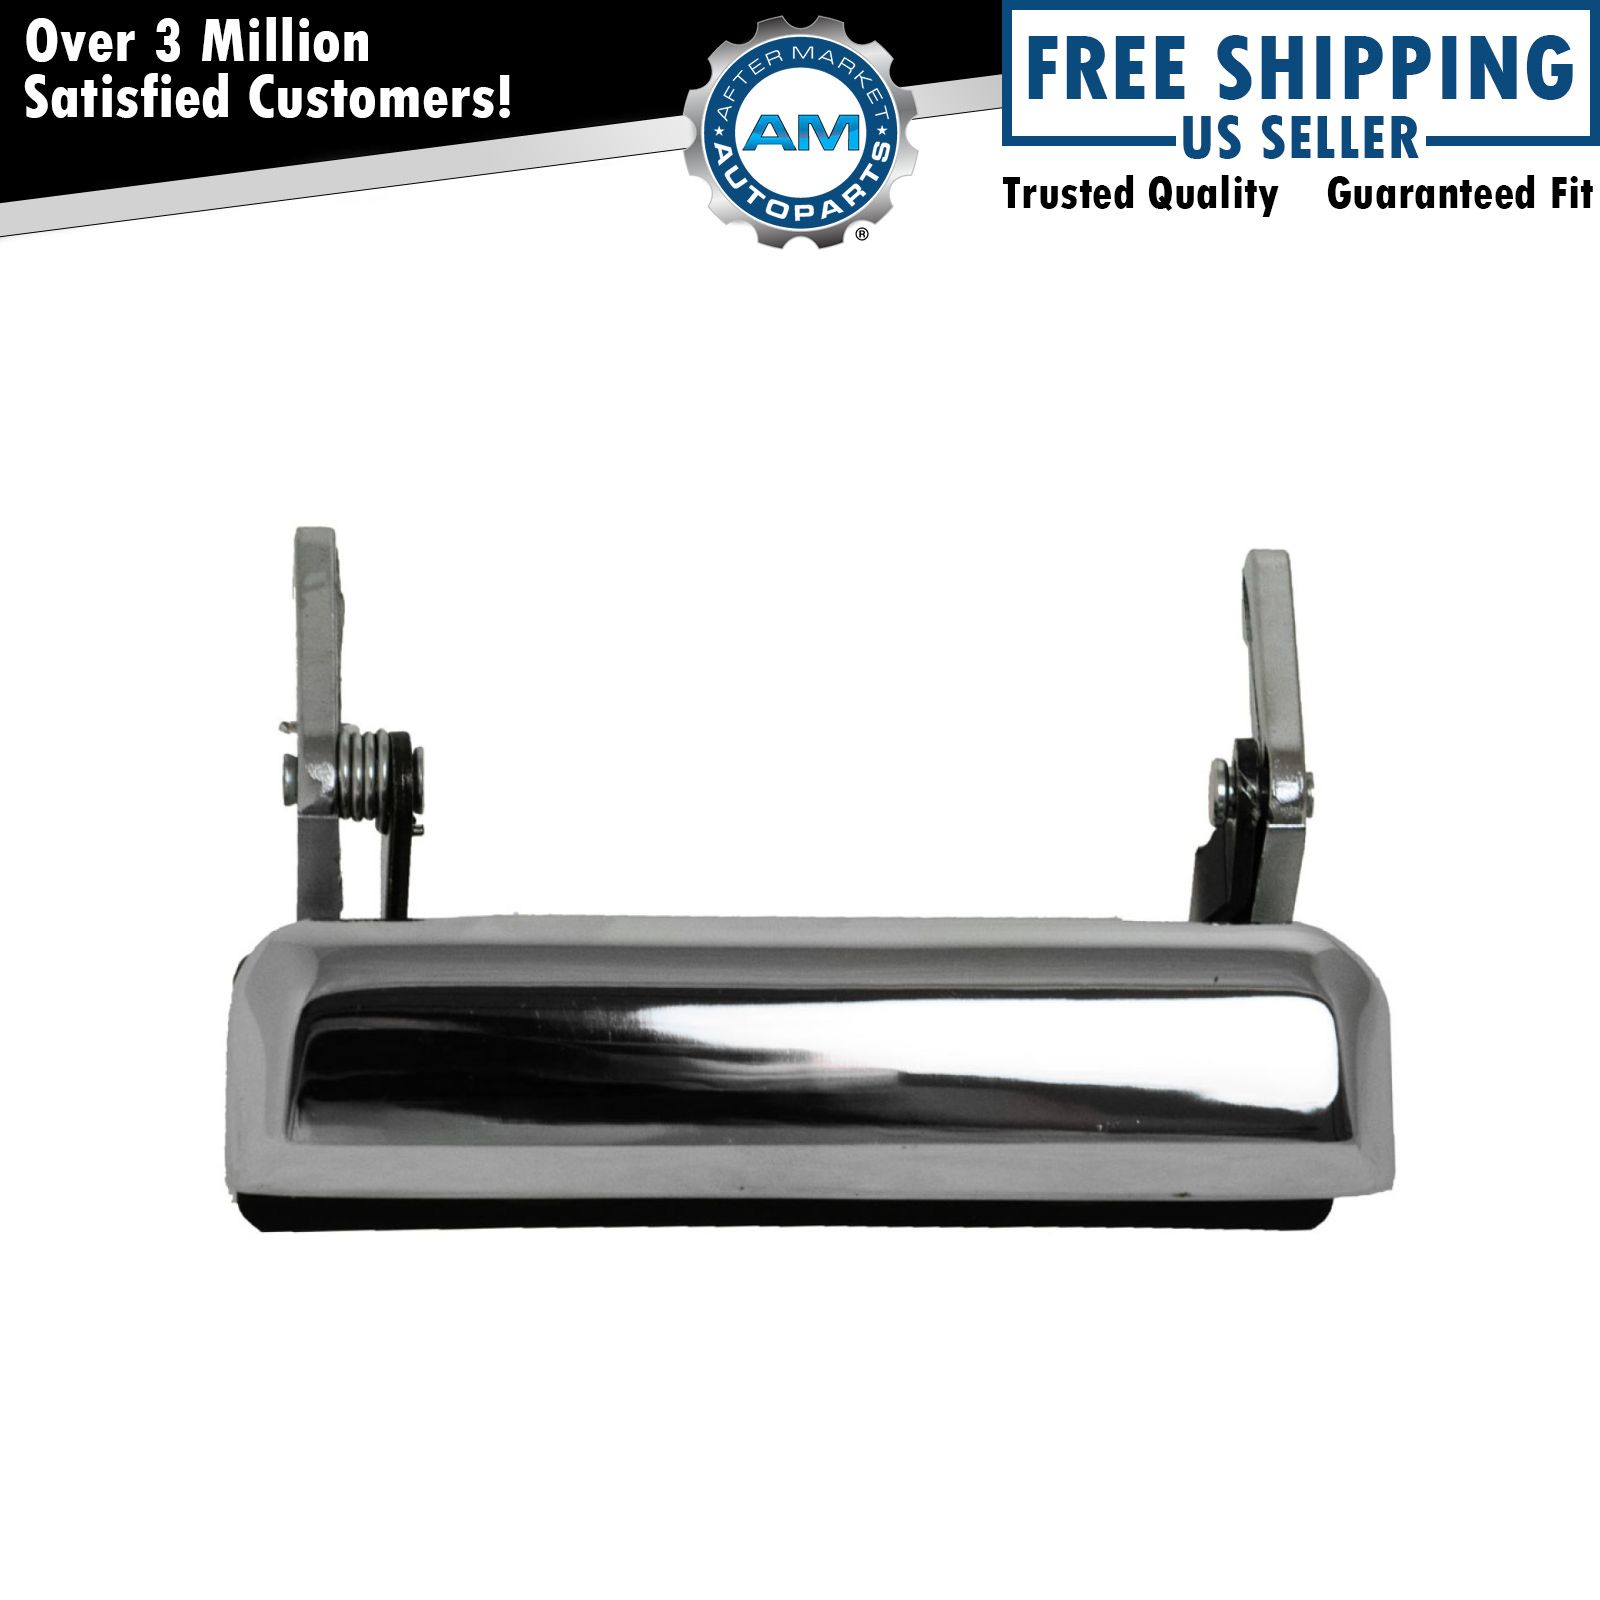 Tailgate Tail Gate Handle Chrome Rear for Ford F150 F250 F350 Ranger Mazda